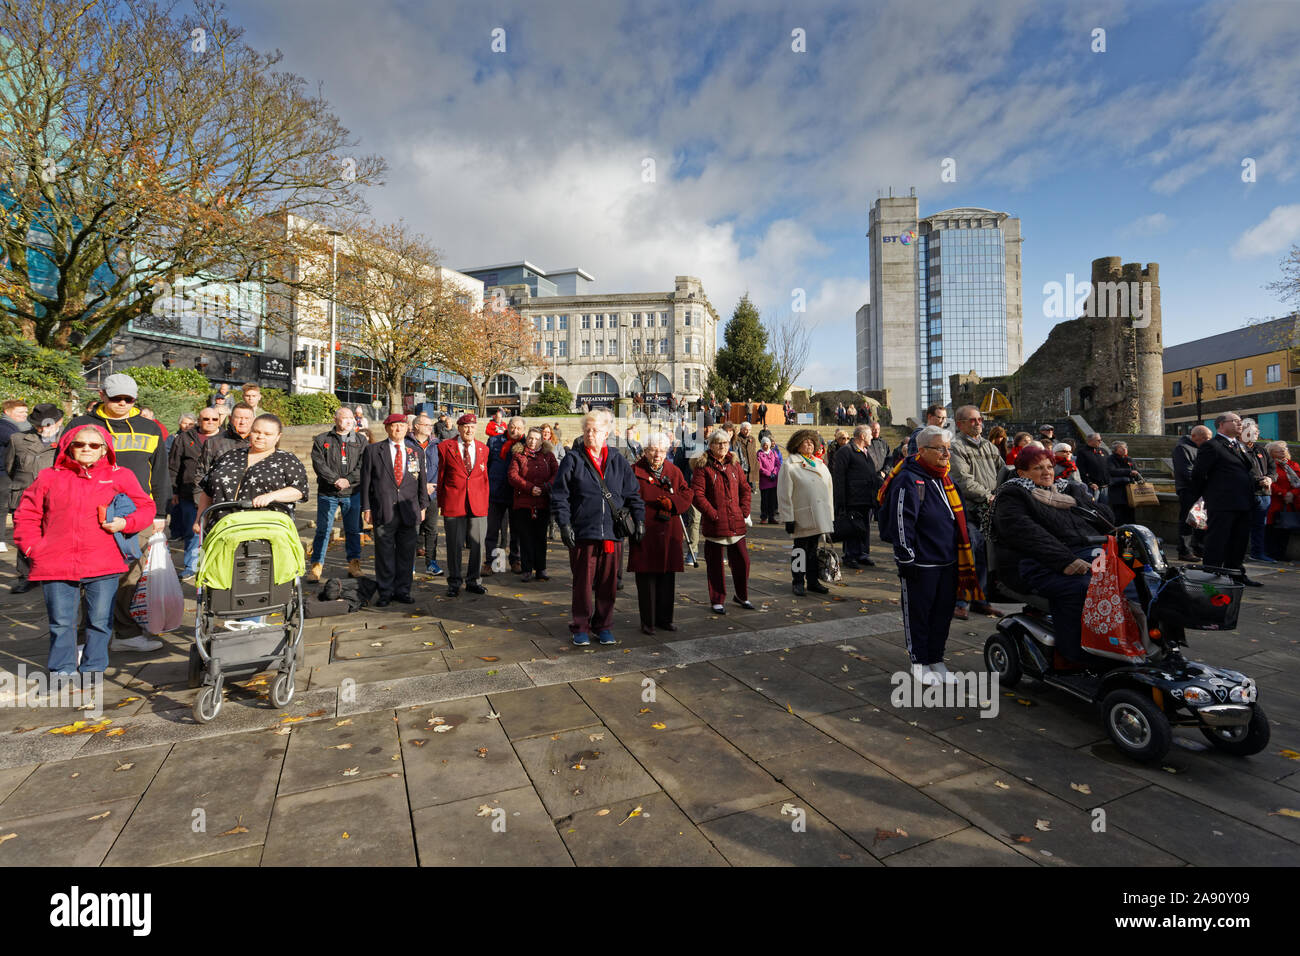 Swansea, UK. 11th Nov, 2019. Pictured: Members of the public, members of the armed forces and veterans gather at Castle Square Gardens in Swansea, Wales, UK. Monday 11 November 2019 Re: Armistice Day, a service to commemorate those who lost their lives in conflict has been held at Castle Square Gardens in Swansea, Wales, UK. Credit: ATHENA PICTURE AGENCY LTD/Alamy Live News Stock Photo